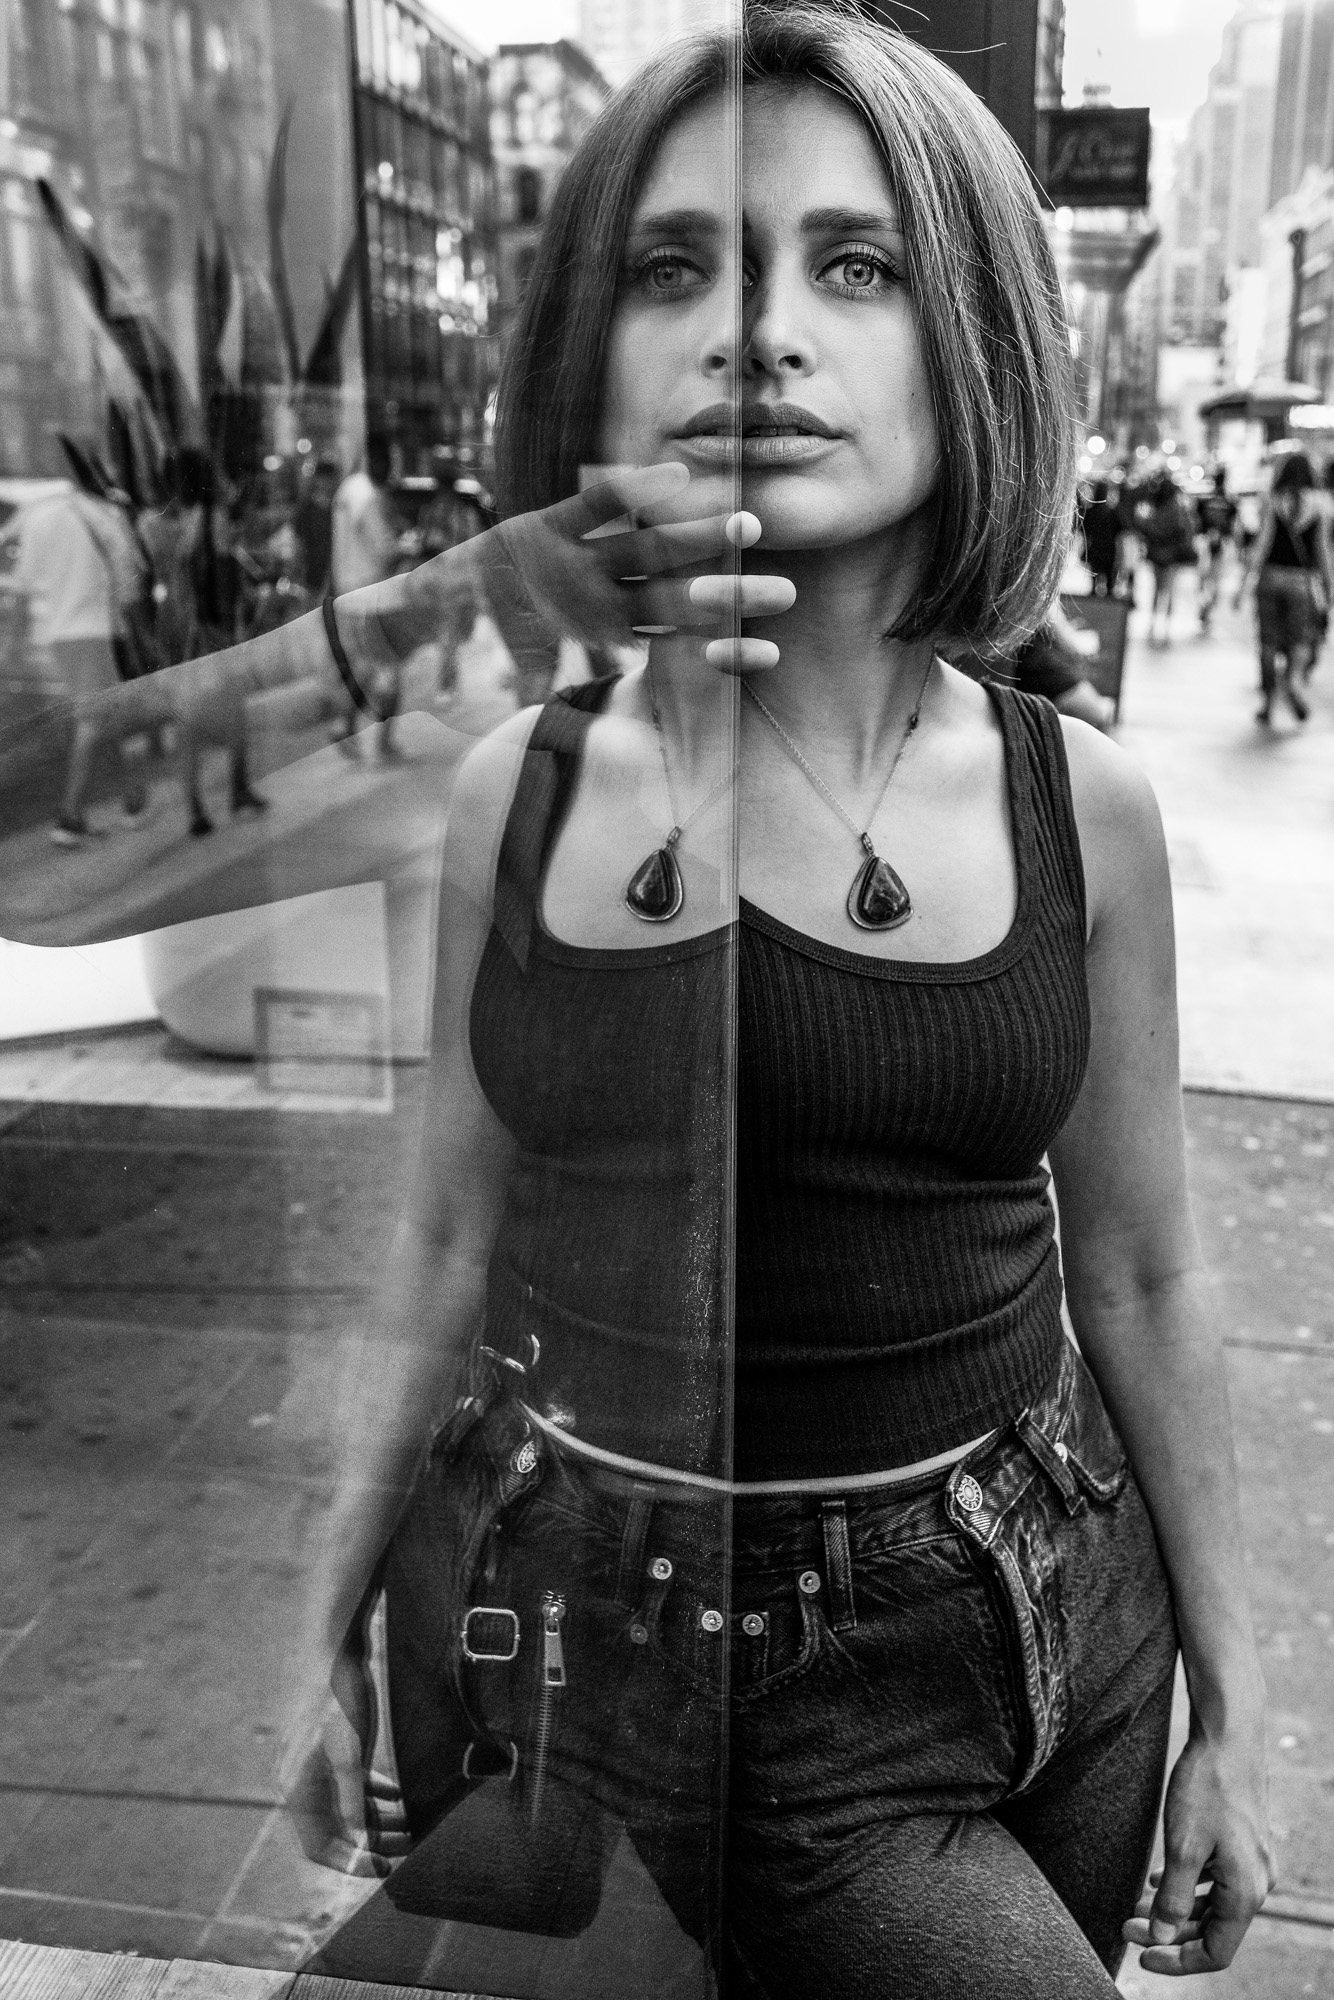 Street photographer Suzanne Stein uses the FUJIFILM X-Pro3 to photograph reality on the streets of New York City.